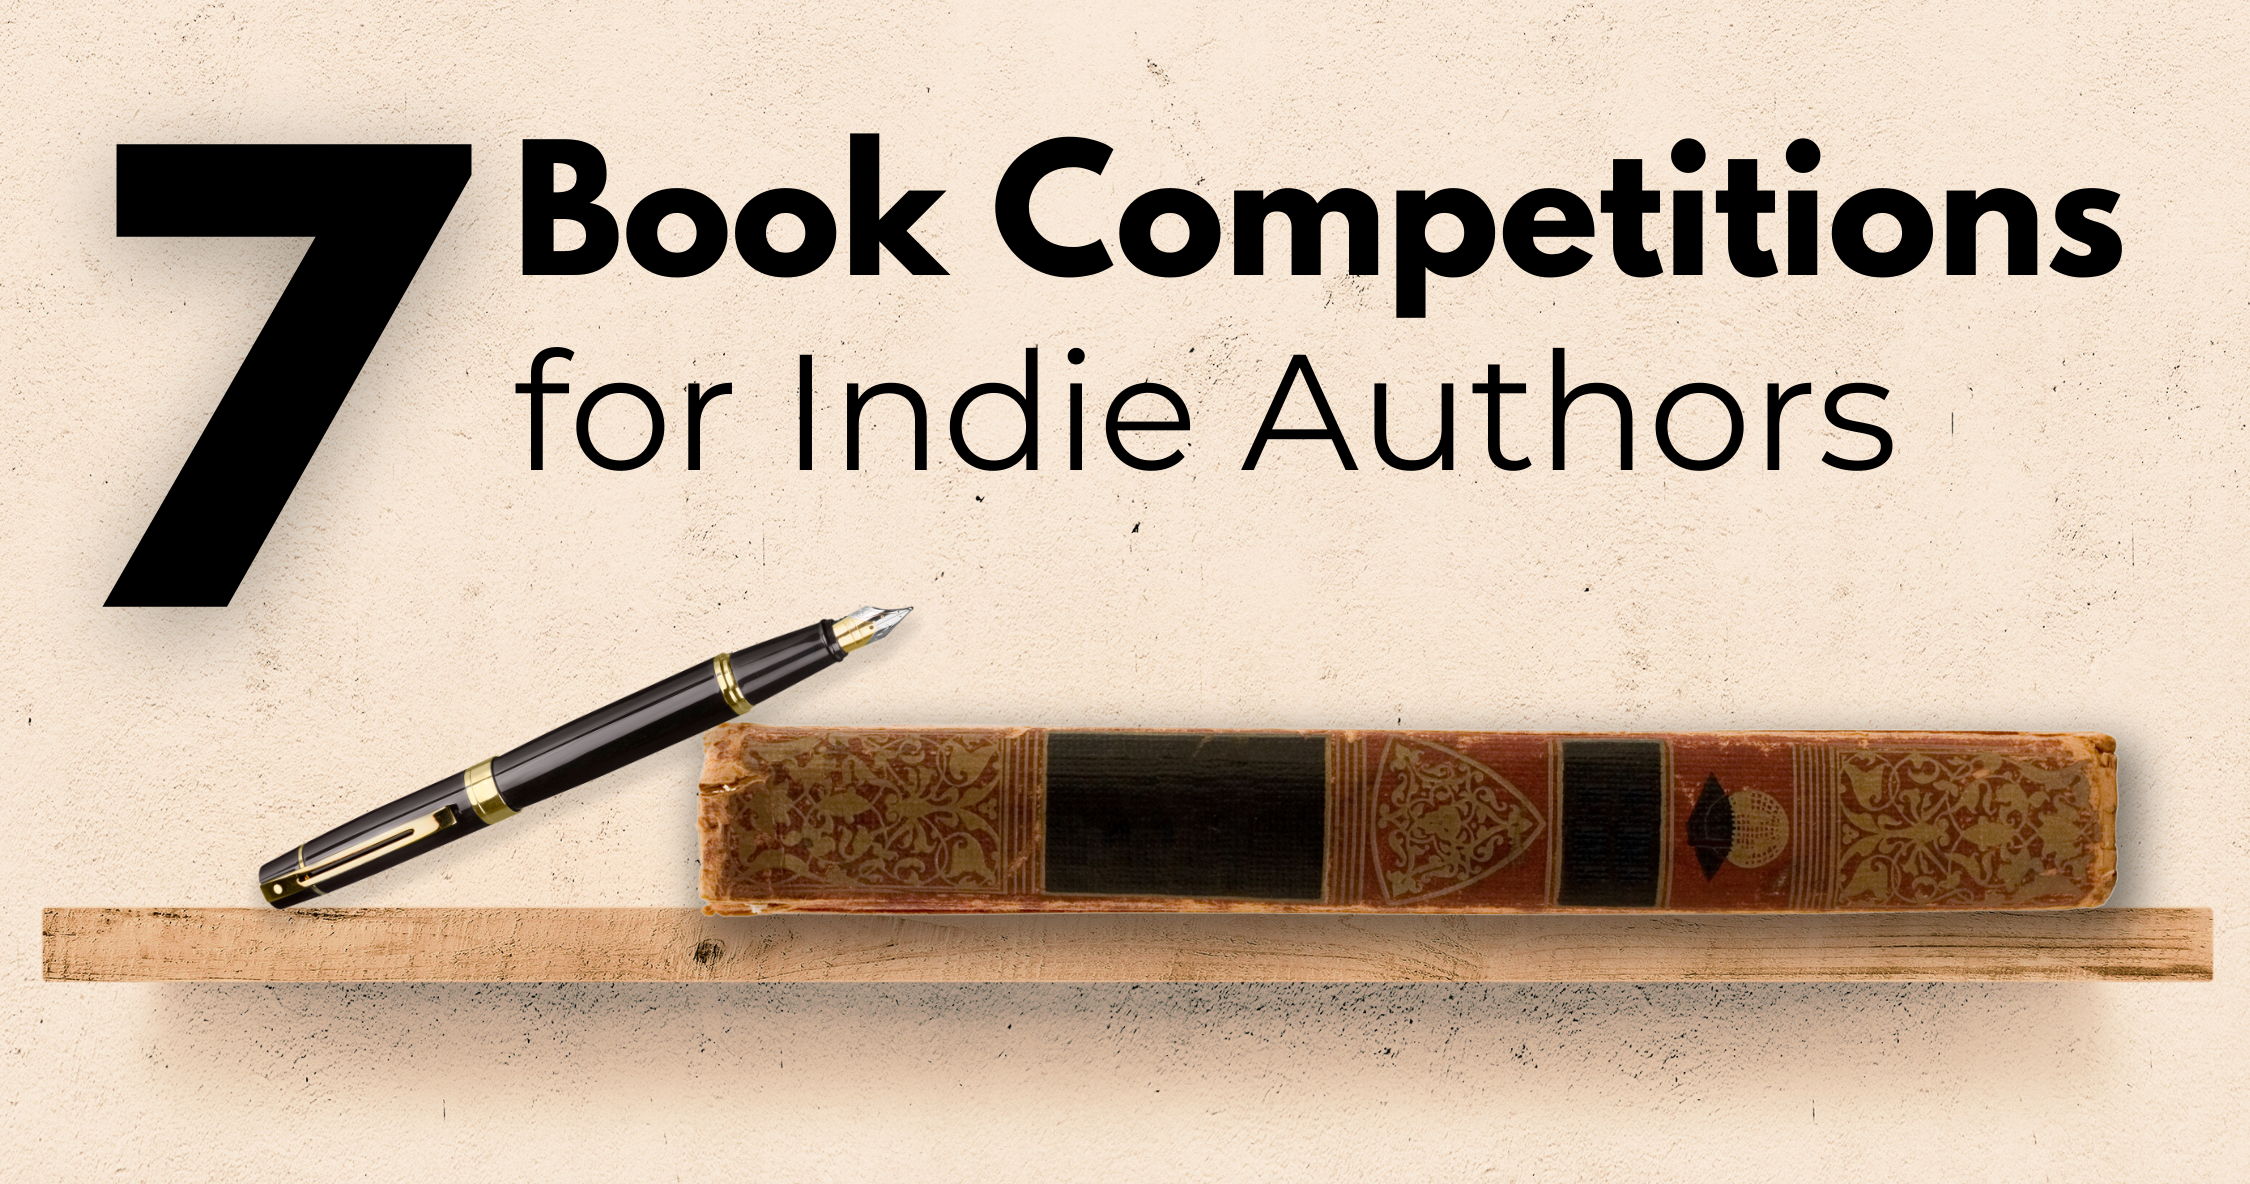 7 Book Competitions for Indie Authors